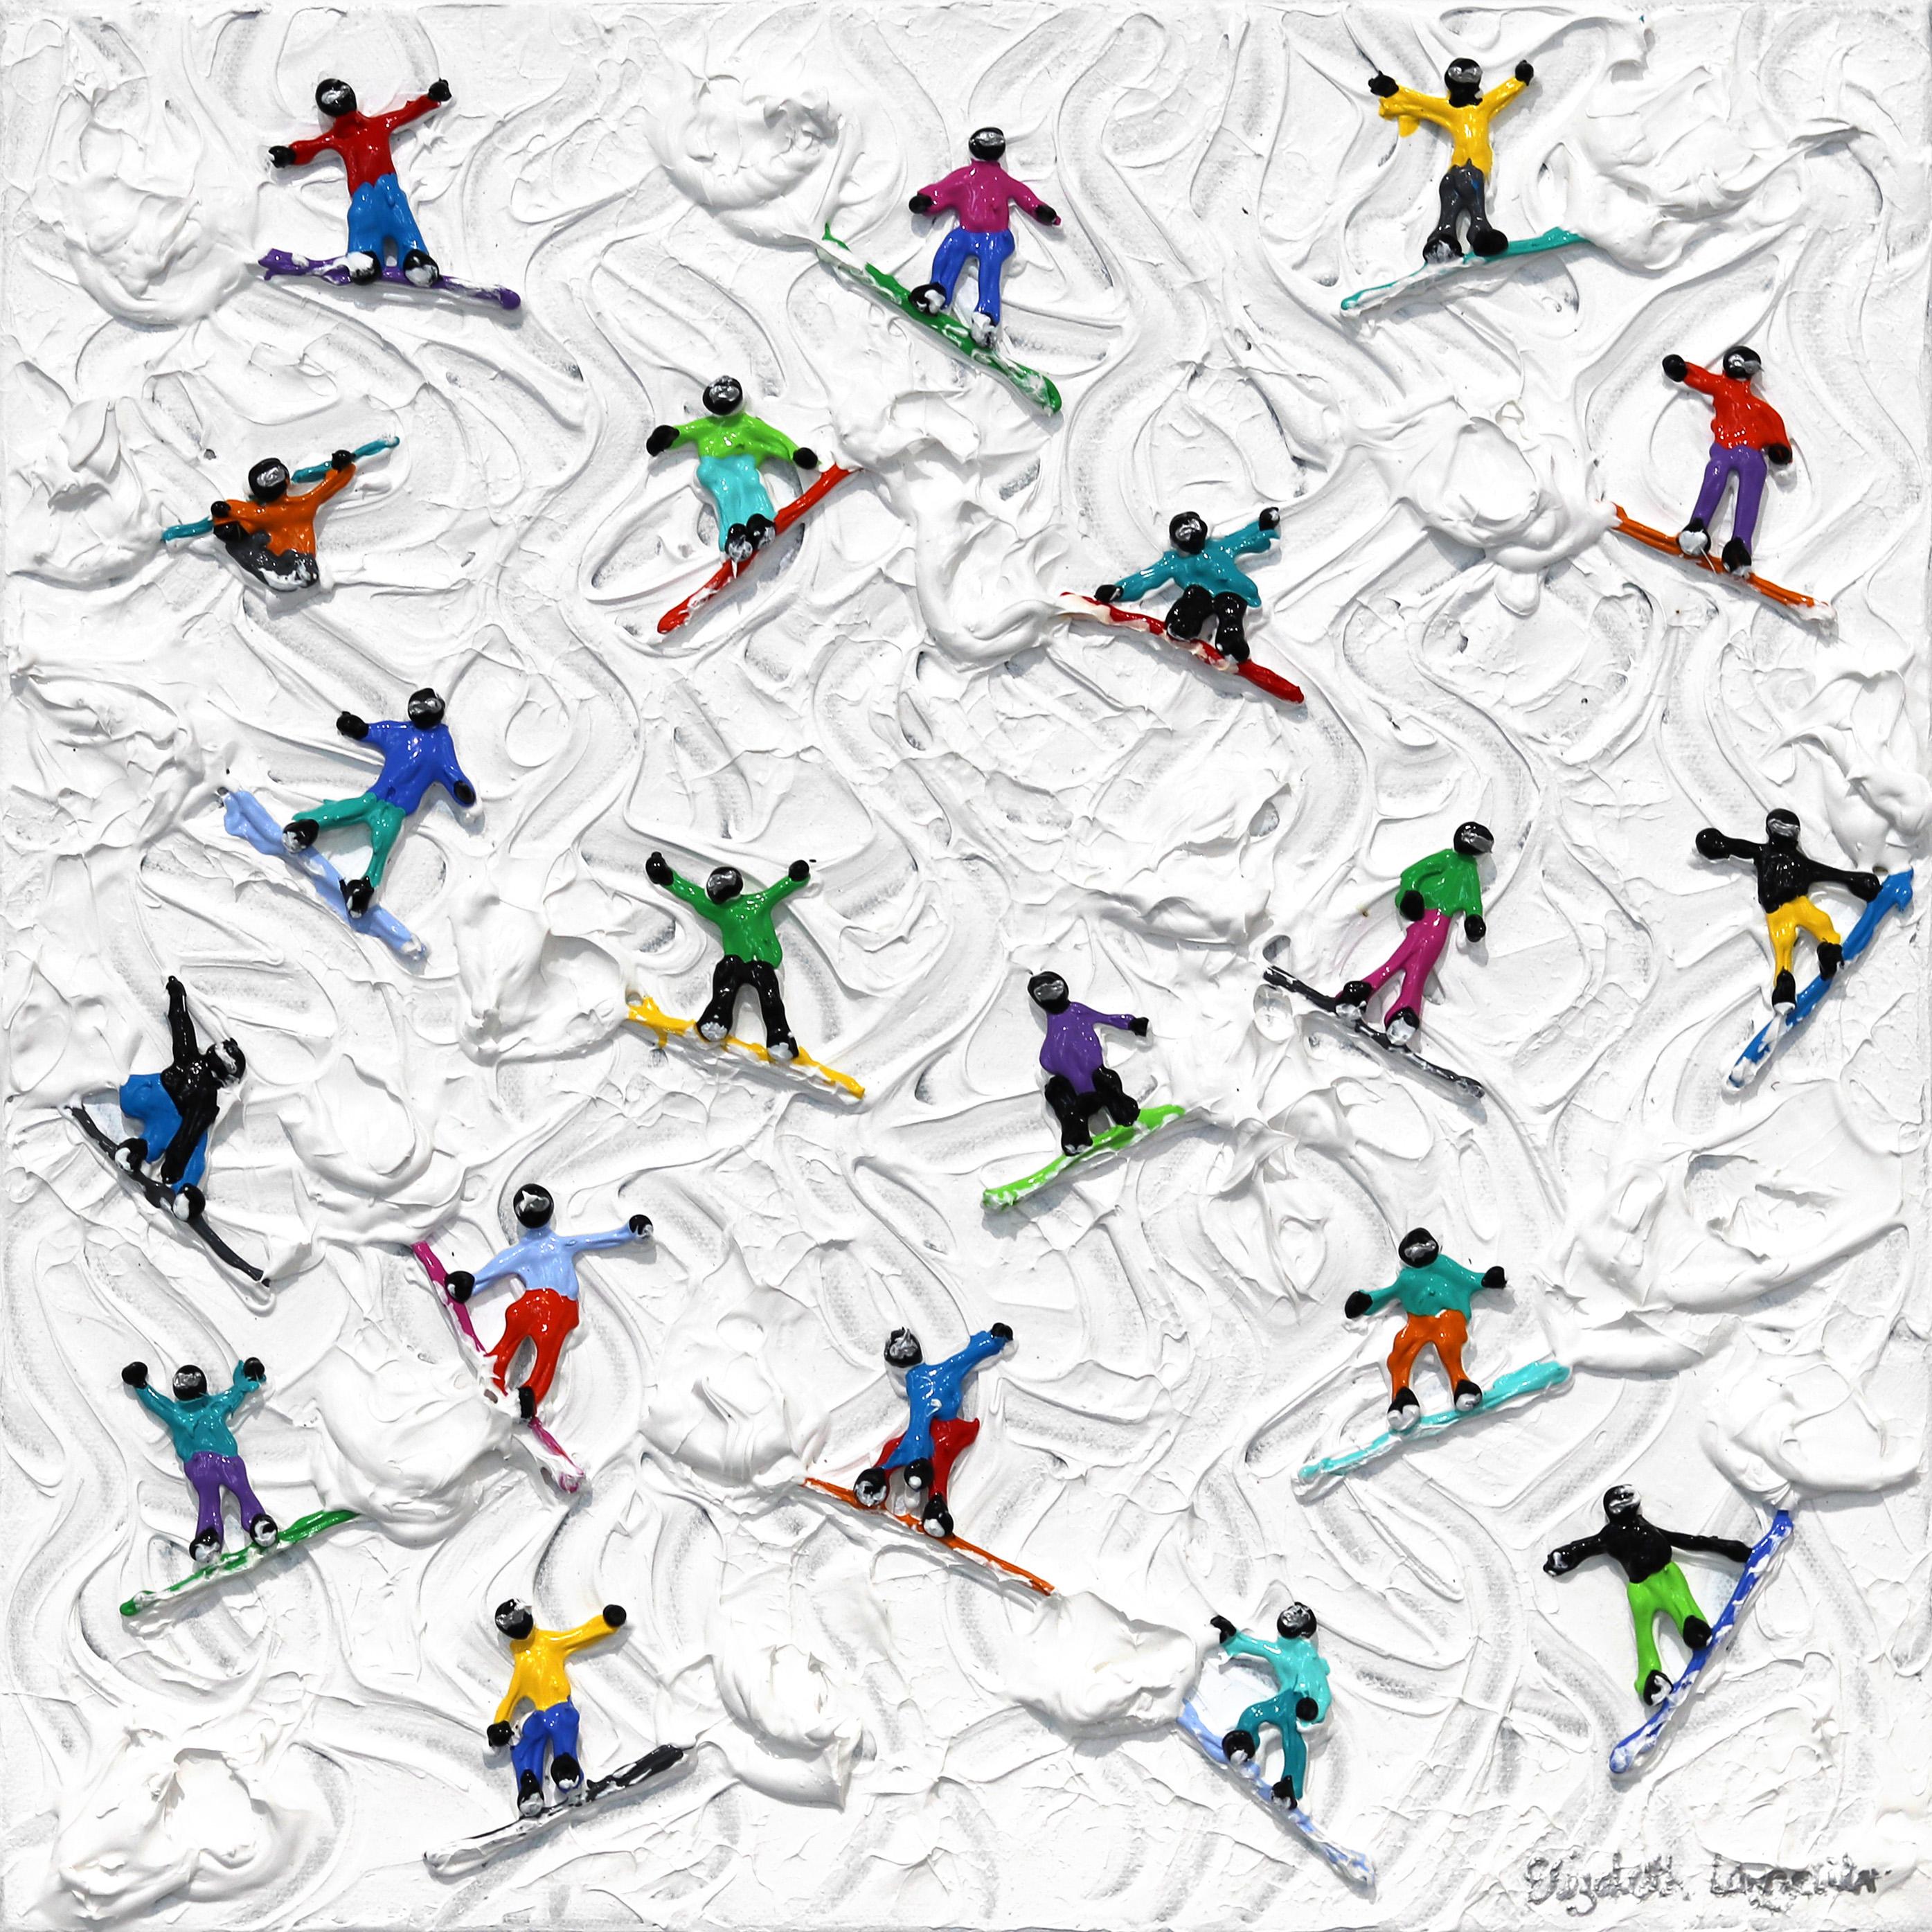 Just Snowboarders - Three Dimensional Textural Winter Landscape Painting - Mixed Media Art by Elizabeth Langreiter